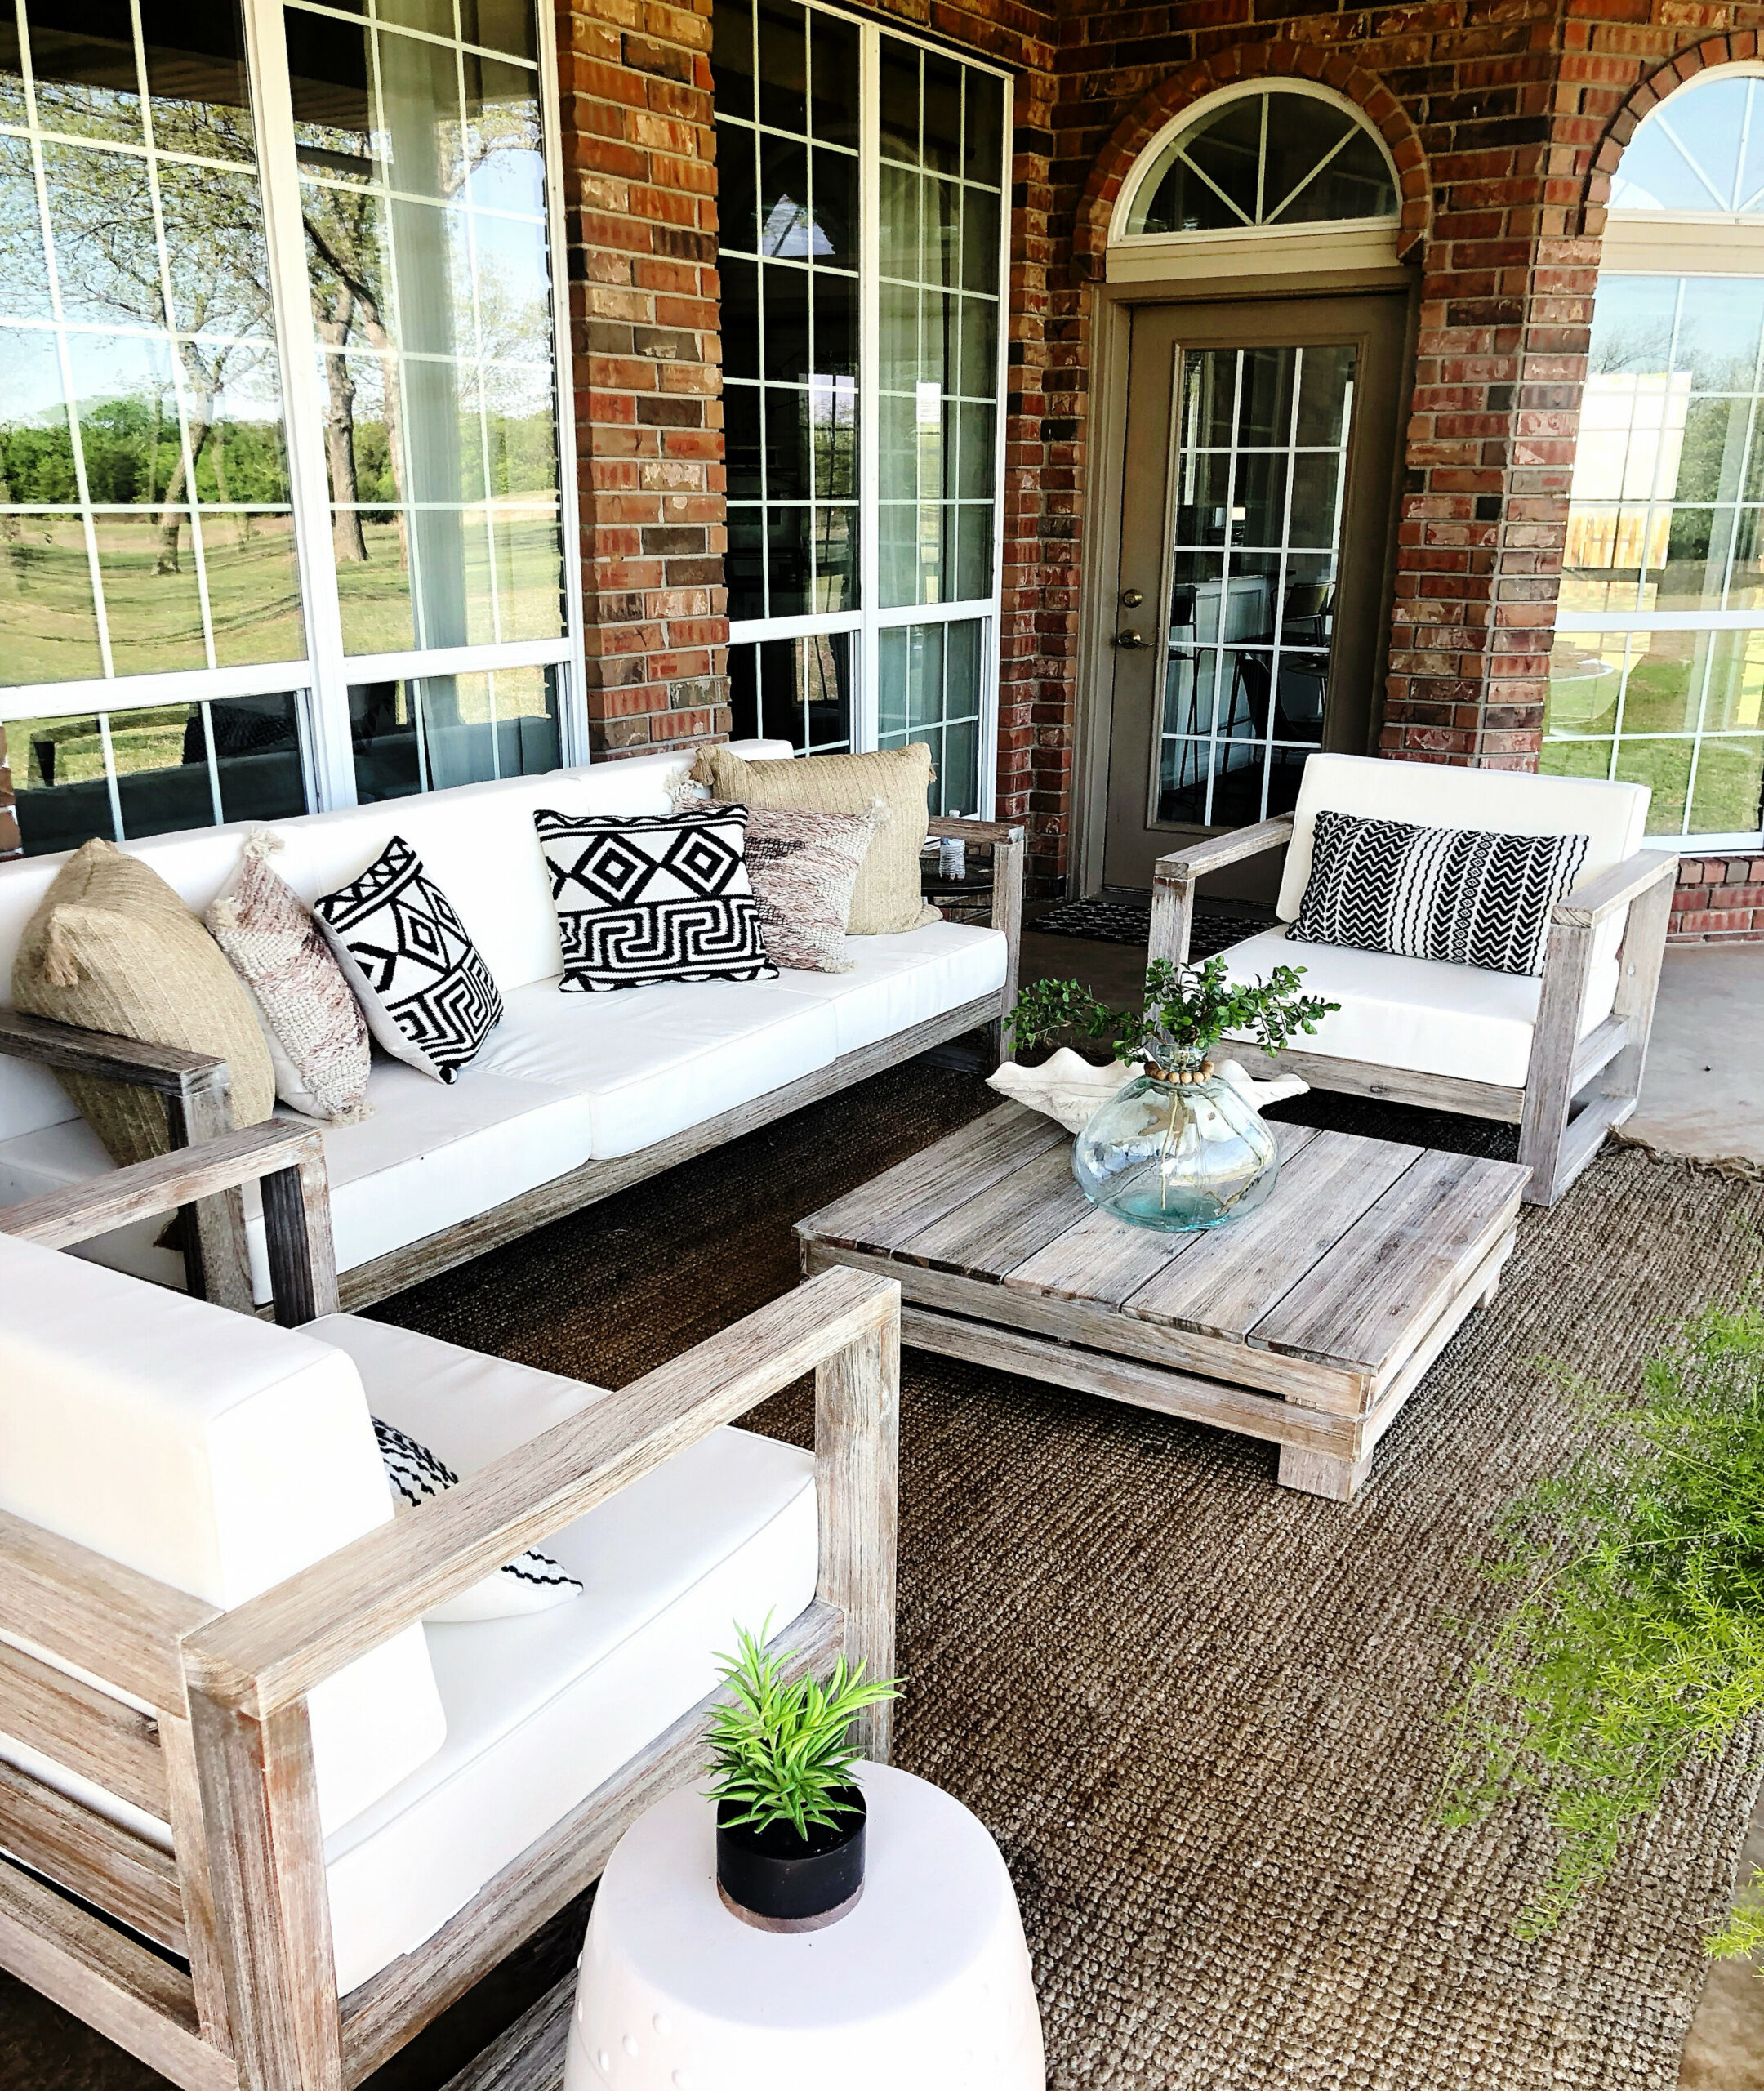 Getting Outdoor Ready with World Market - The Spoiled Home